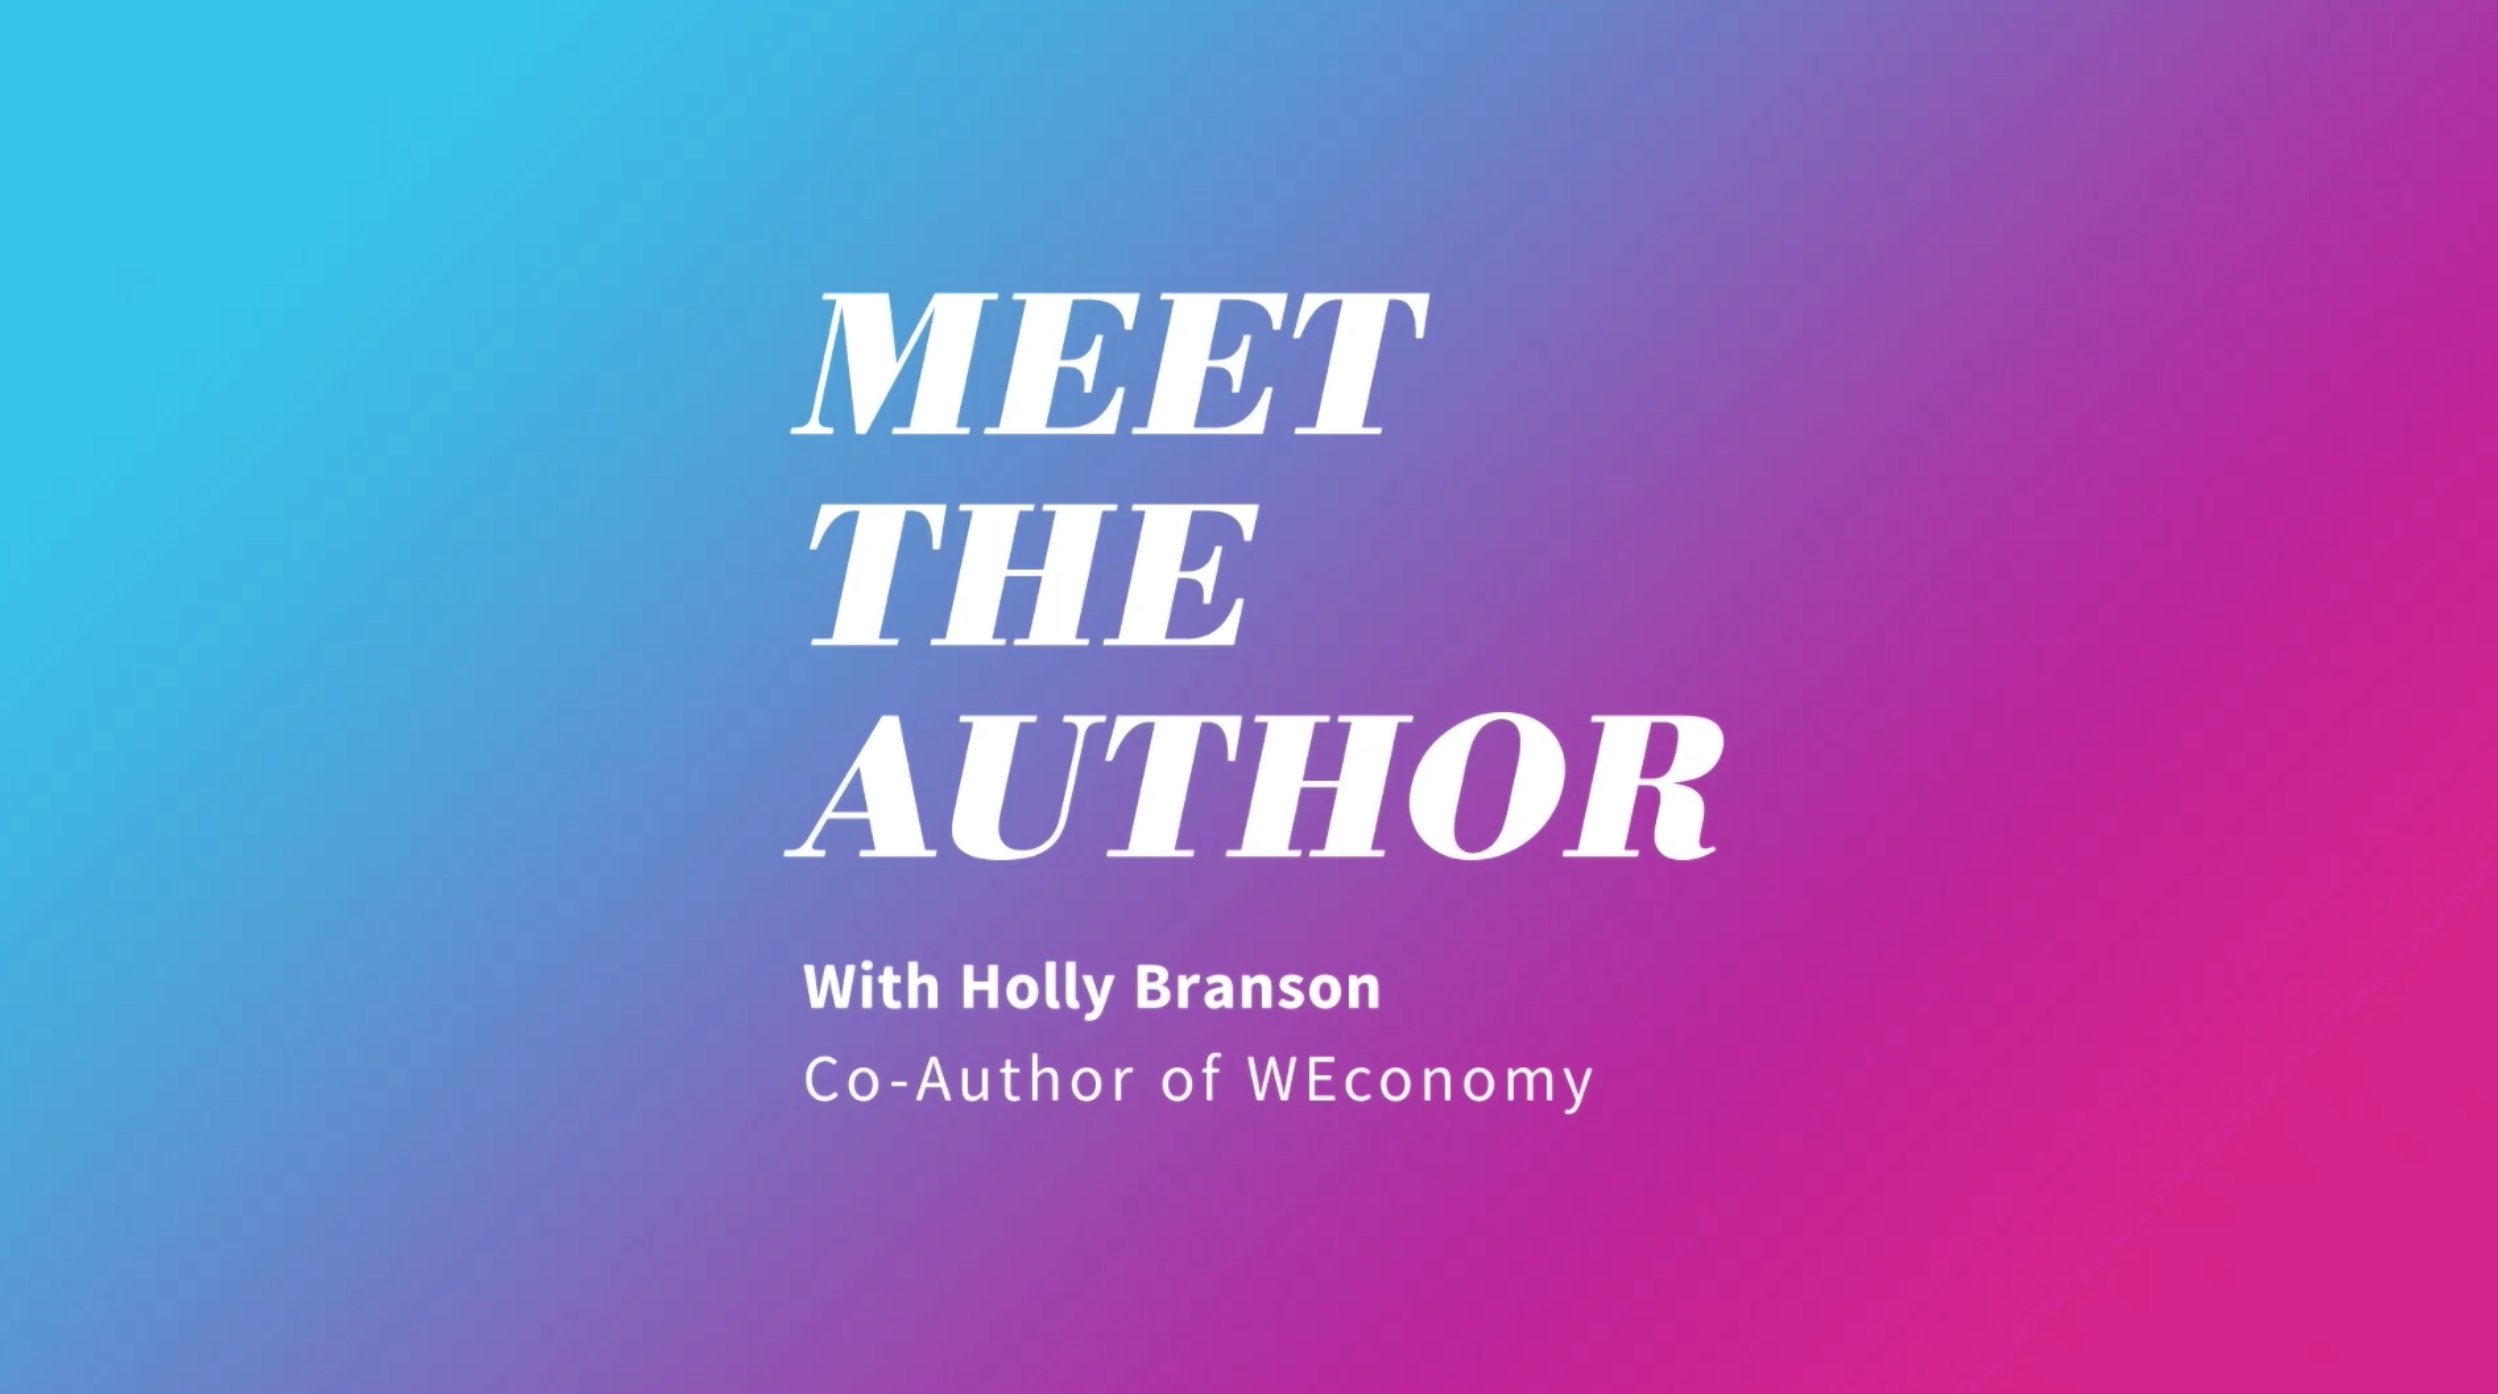 Meet the Author interview with Holly Branson poster